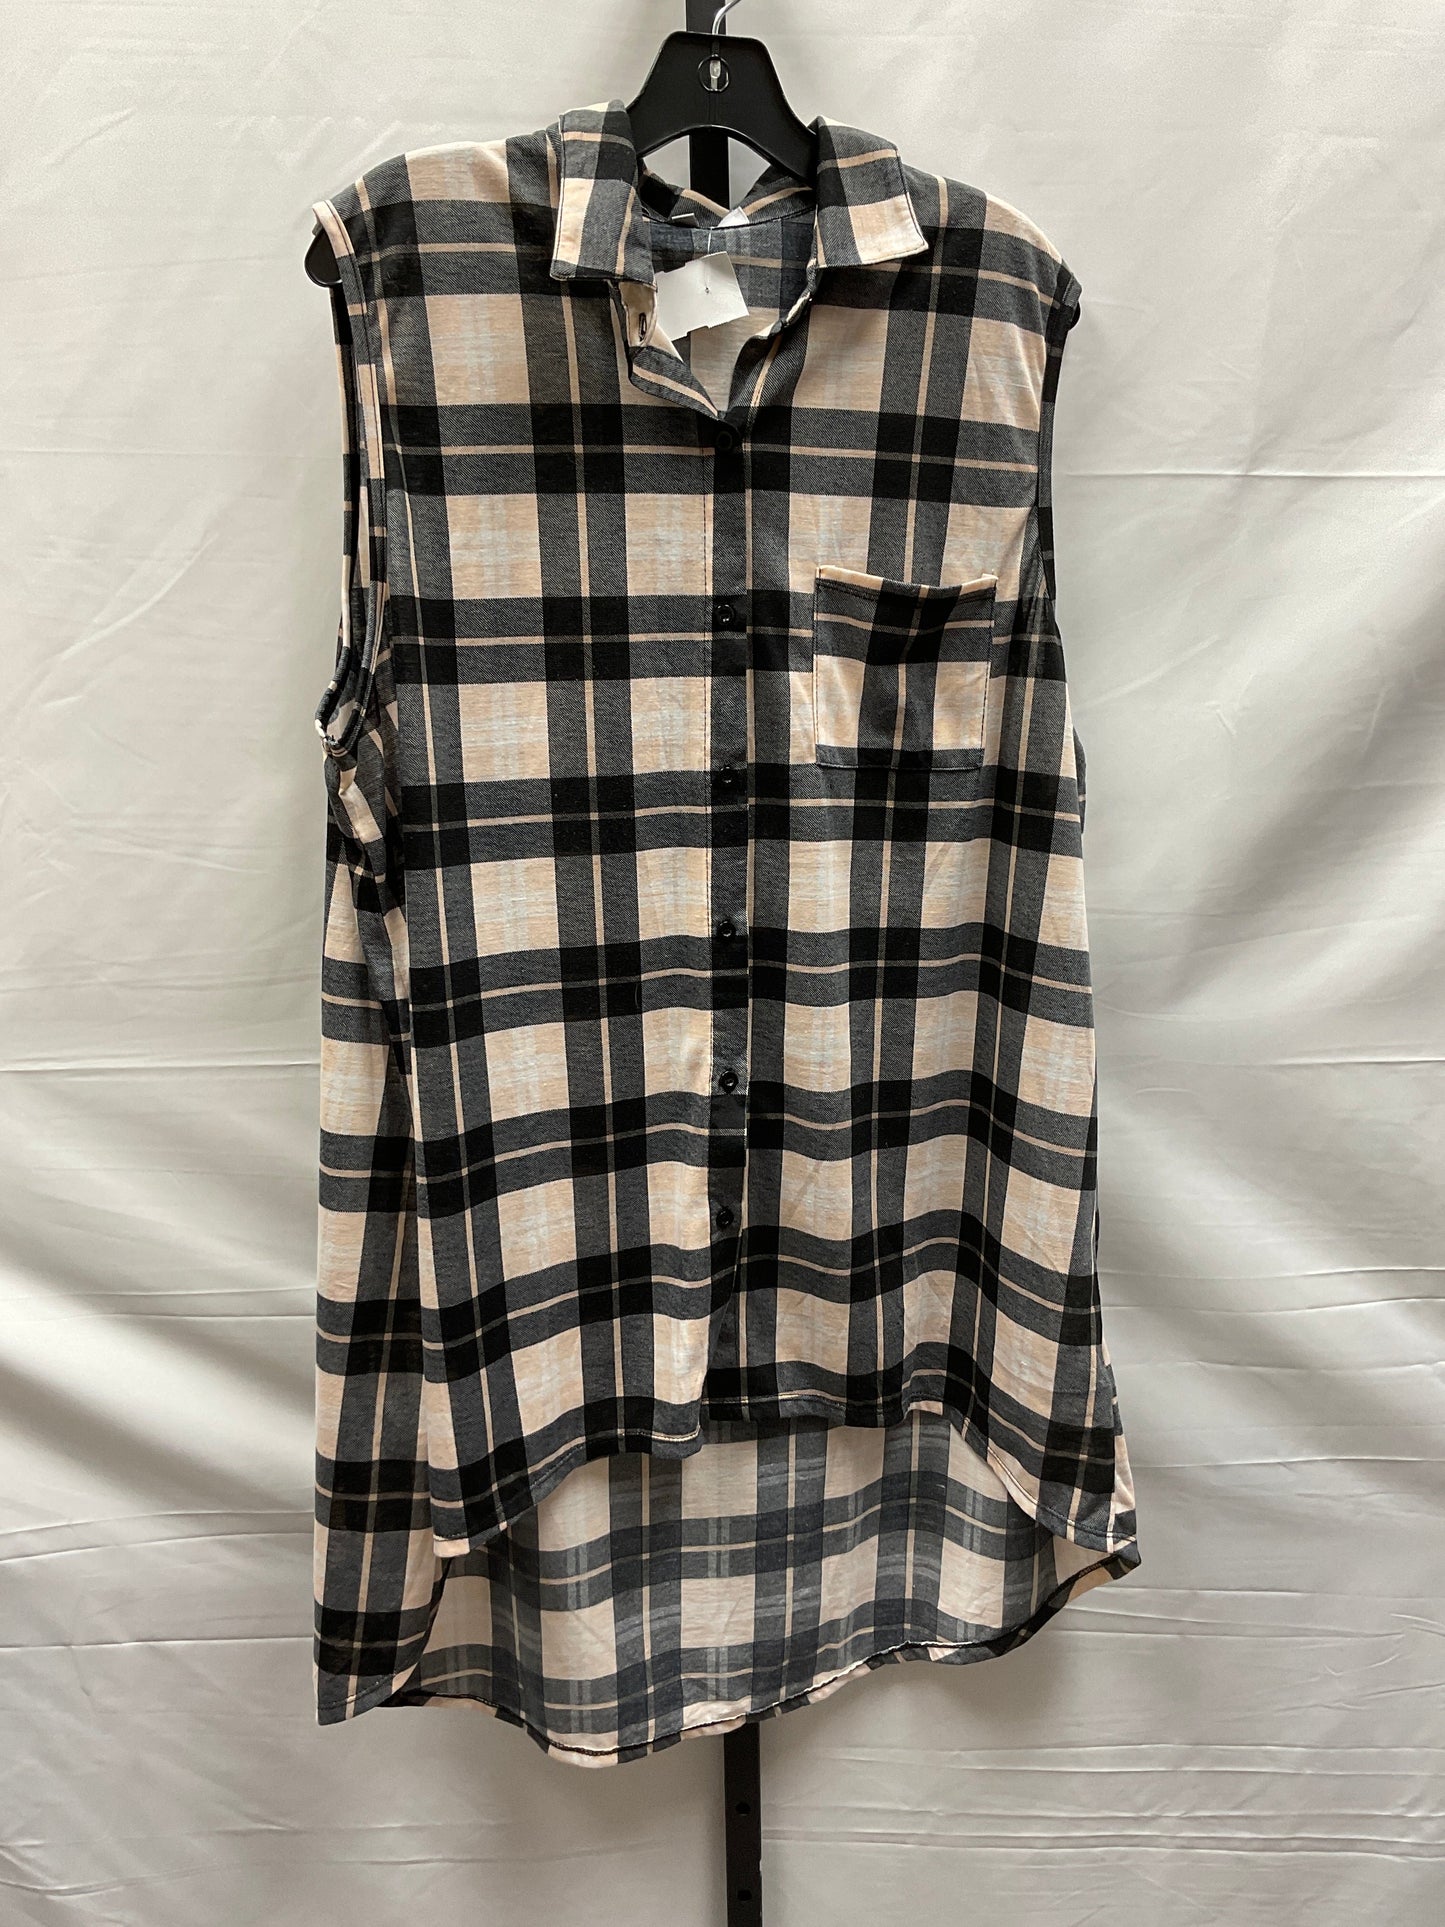 Plaid Pattern Top Sleeveless Clothes Mentor, Size 3x